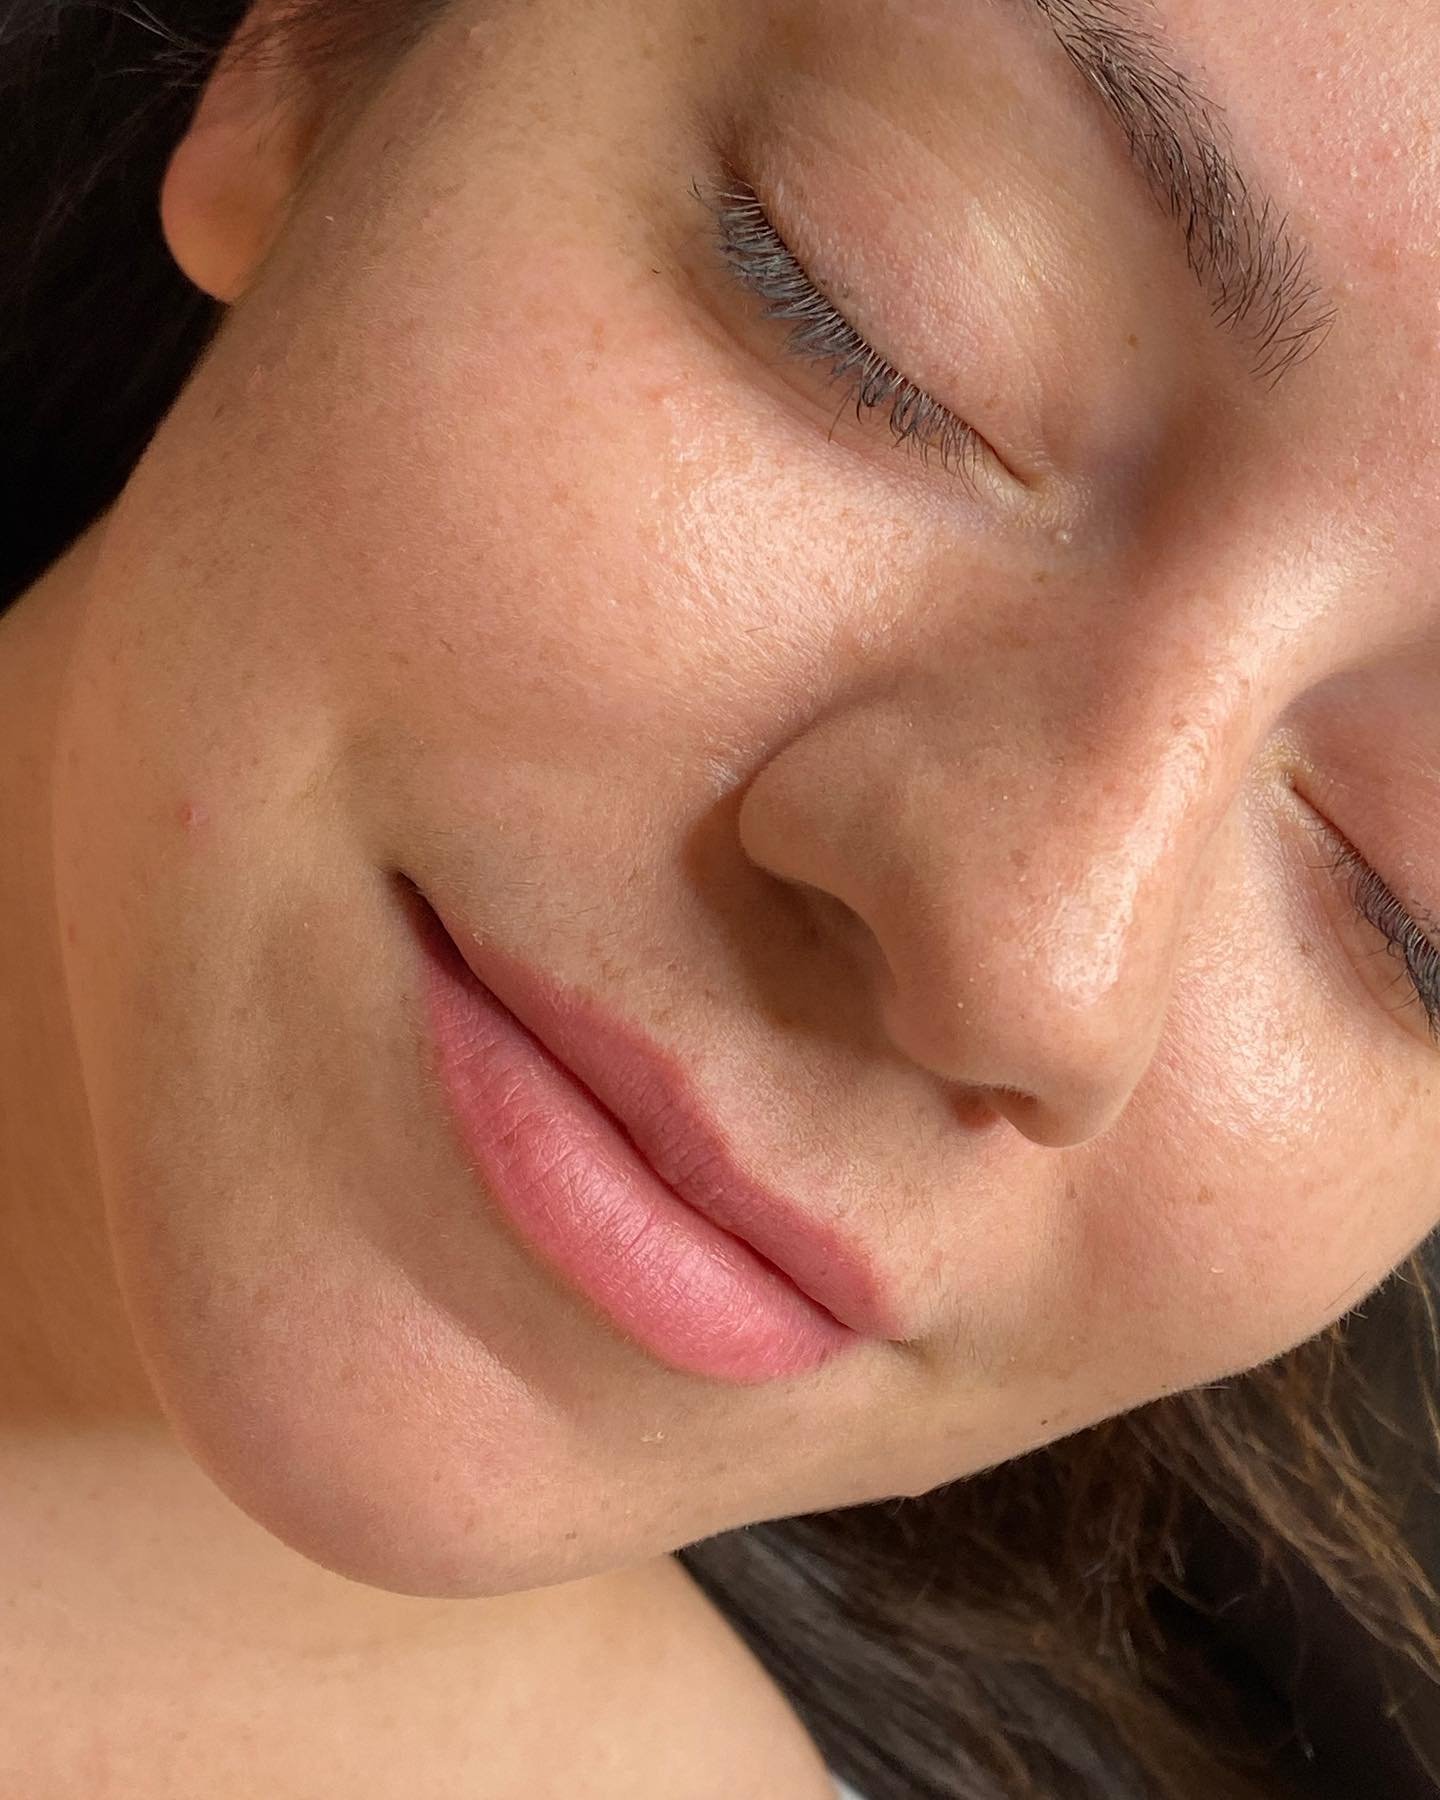 She woke up like this! Check out this beautiful lip blushing. There&rsquo;s no need for daily lip products, yet if she ever decides to embrace another lip shade for the day this lip blushing can be dialed up or down. I have a few spots remaining for 